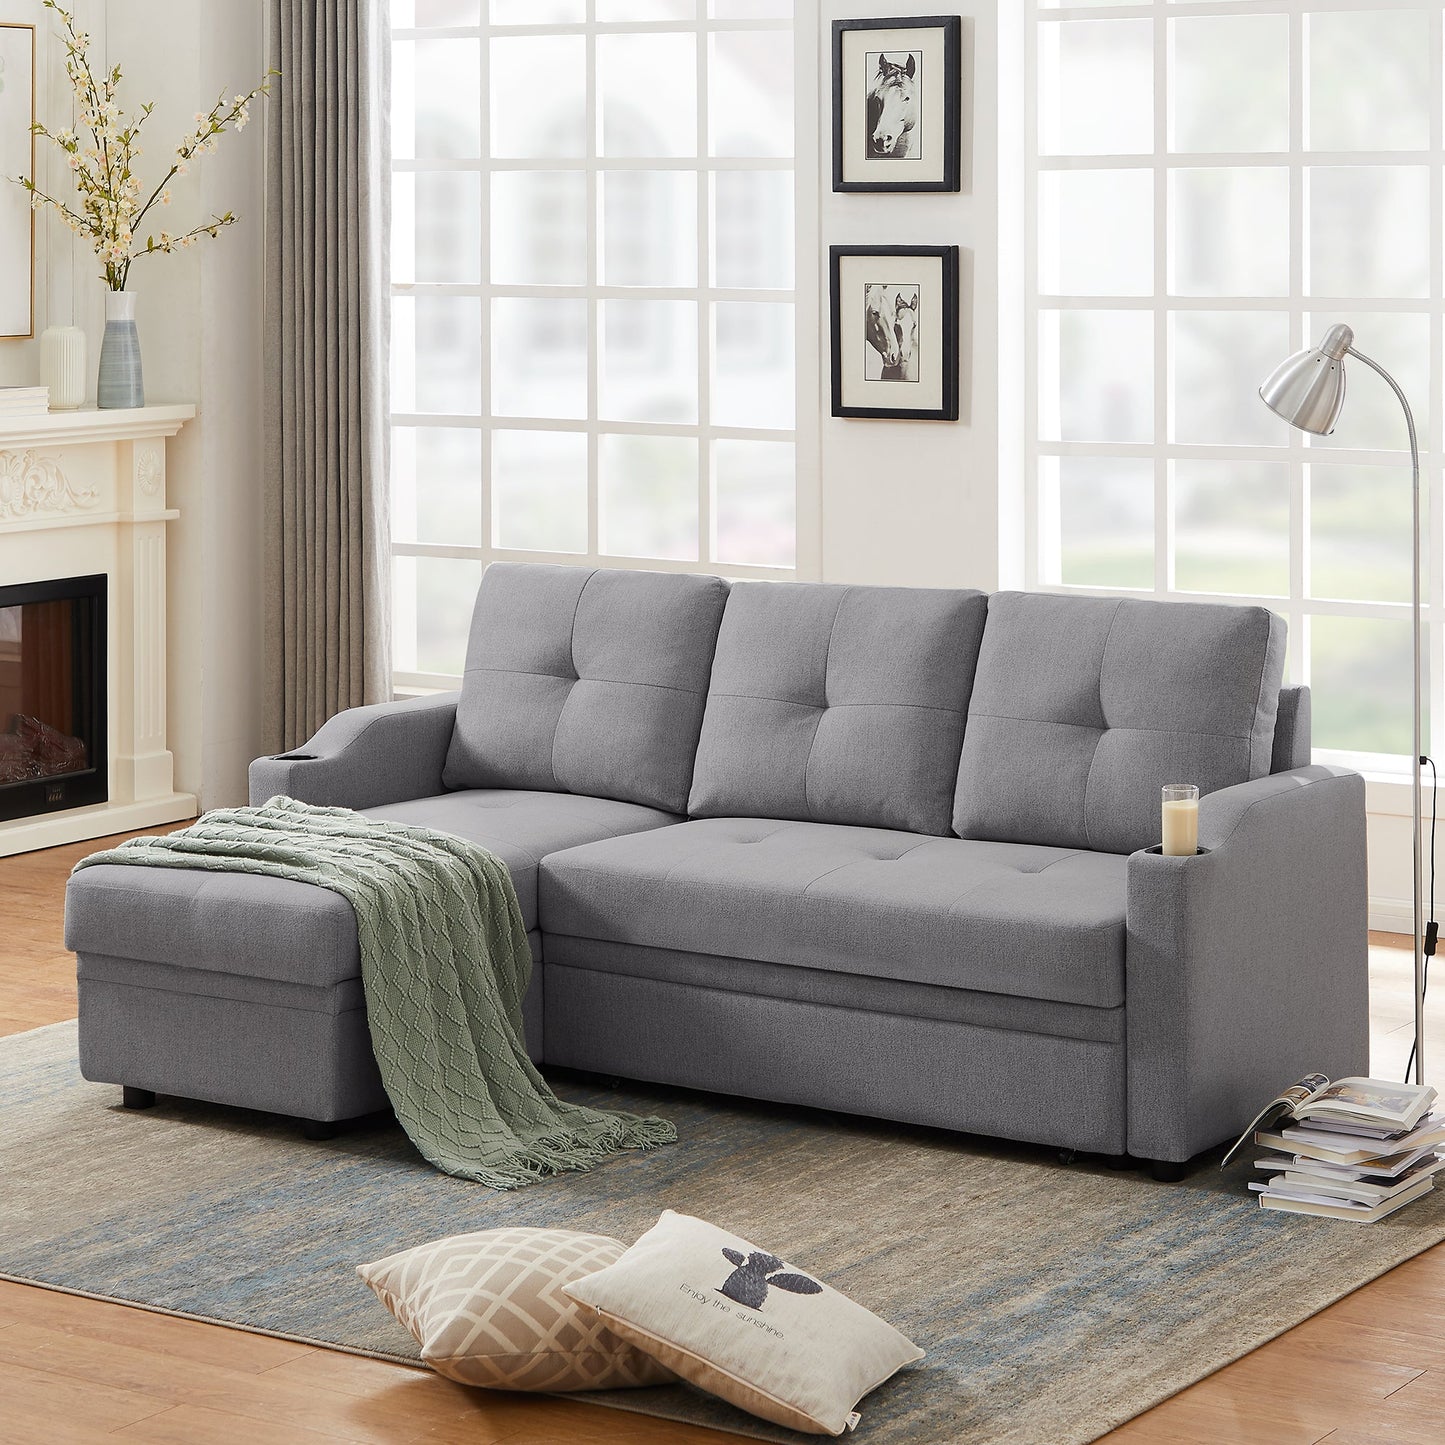 Sleeper Sectional Couch with Storage Chaise and Two Cup Holders Furniture Set Grey - Demine Essentials